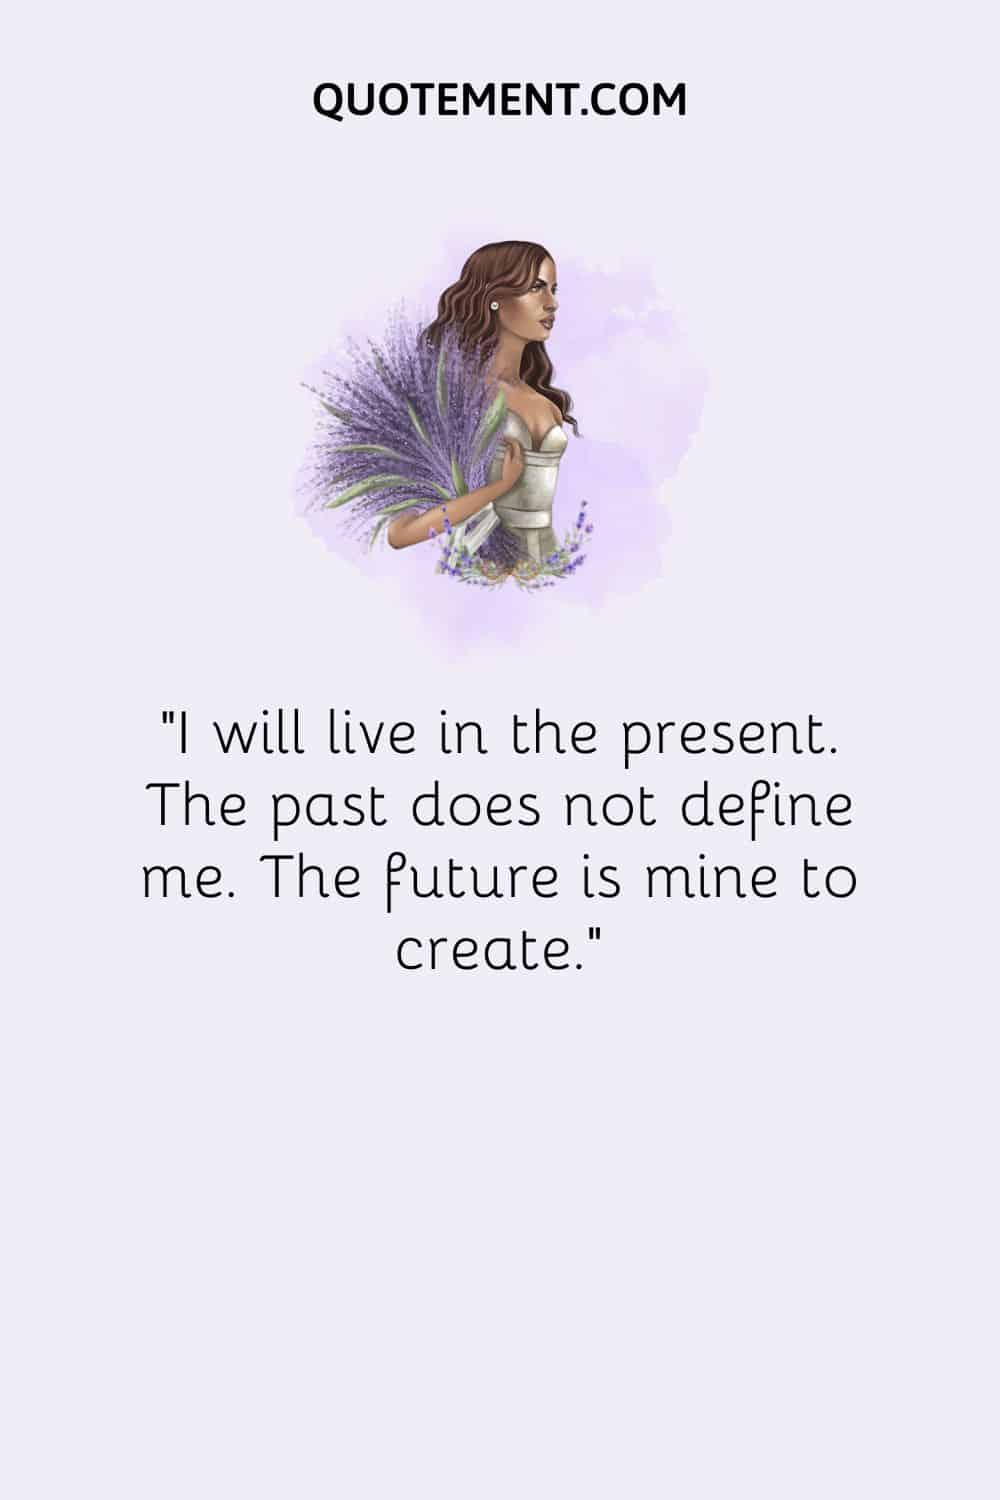 I will live in the present. The past does not define me